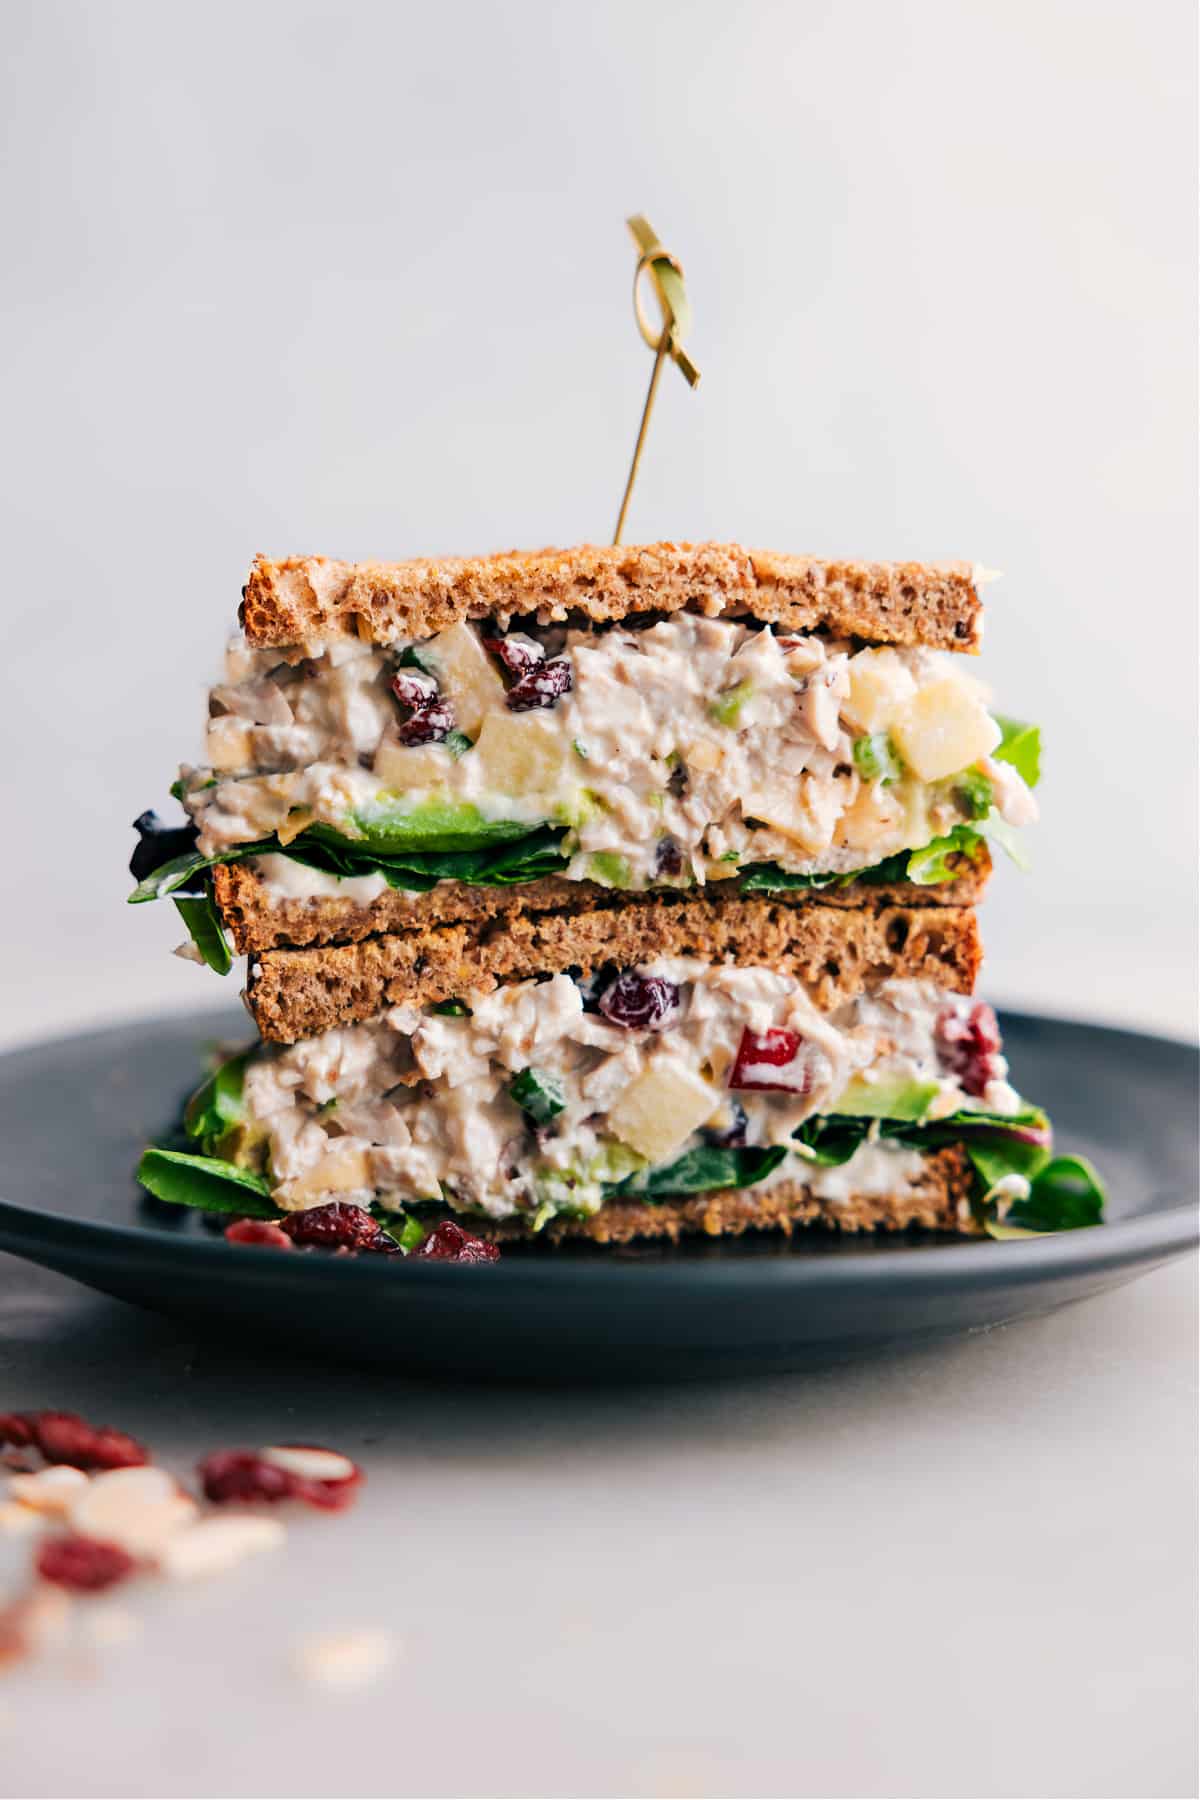 Stacked half-cut chicken salad with apples, showcasing the flavorful filling inside.